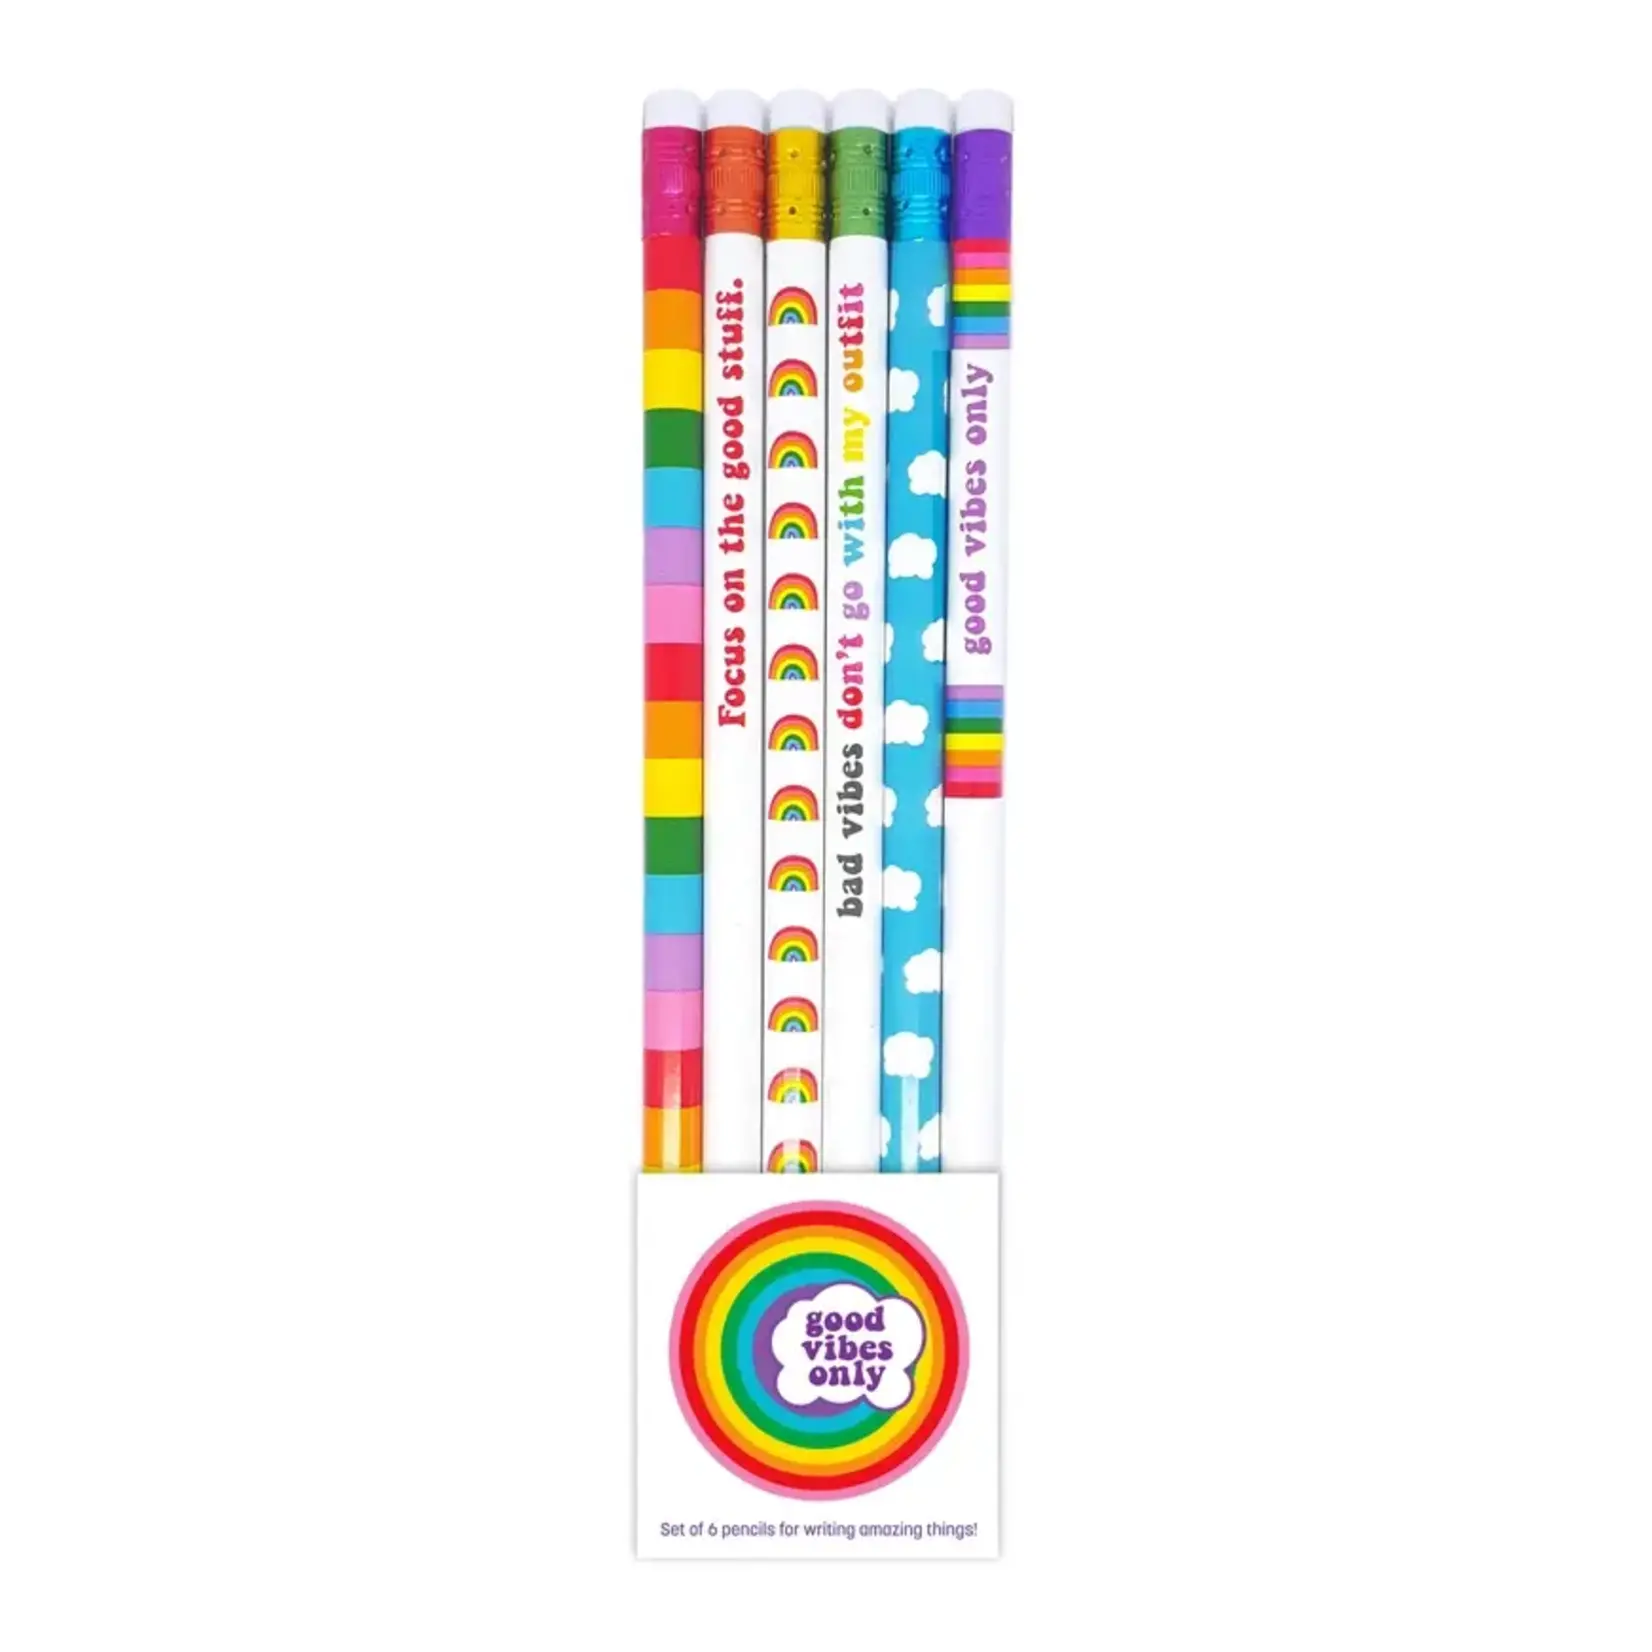 GOOD VIBES ONLY PENCIL SET